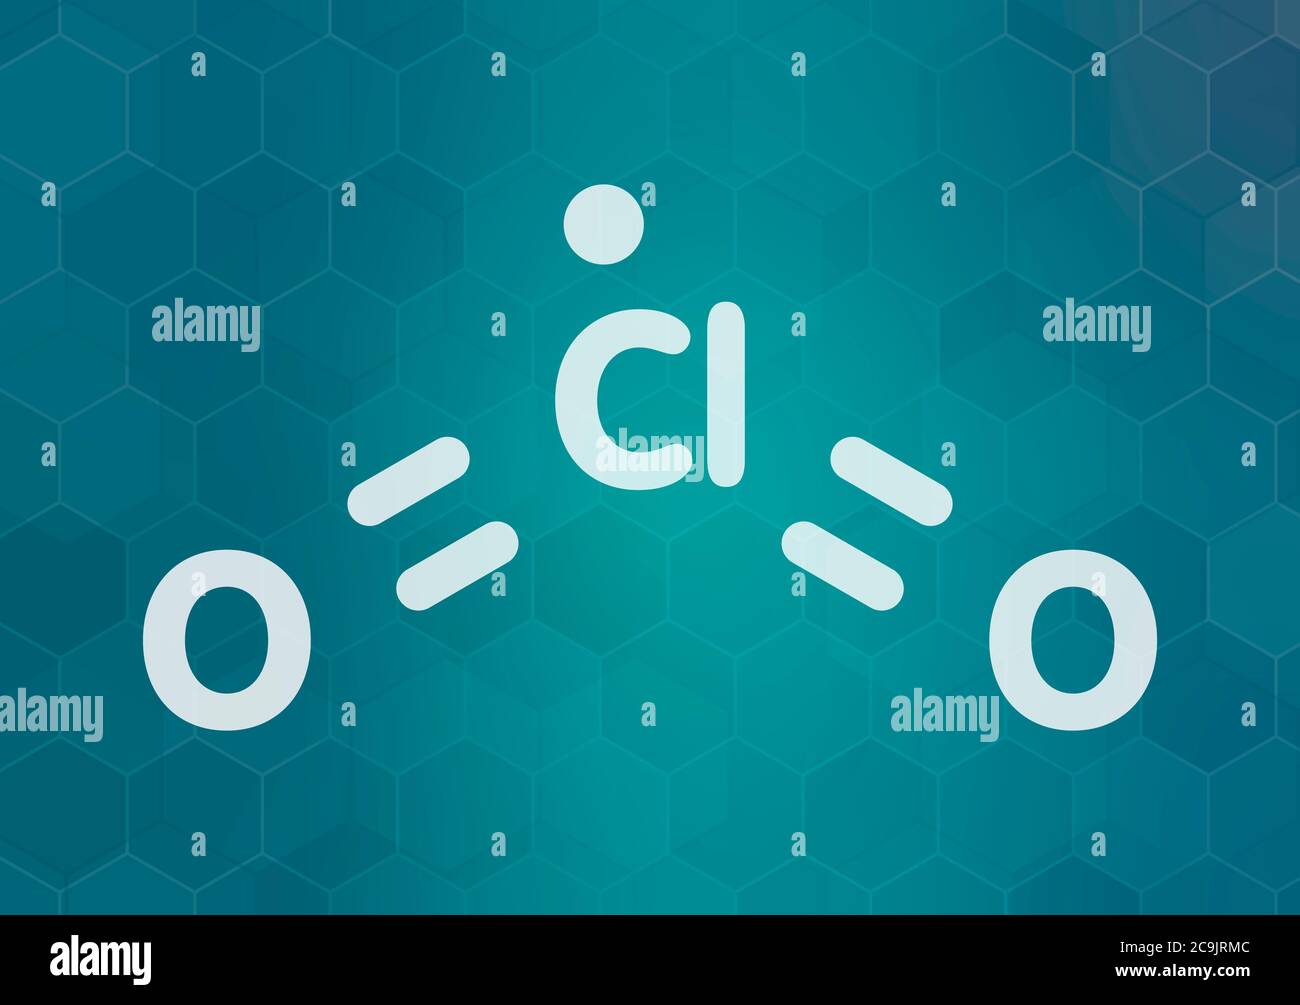 Chlorine dioxide (ClO2) molecule. Used in pulp bleaching and for disinfection of drinking water. White skeletal formula on dark teal gradient backgrou Stock Photo